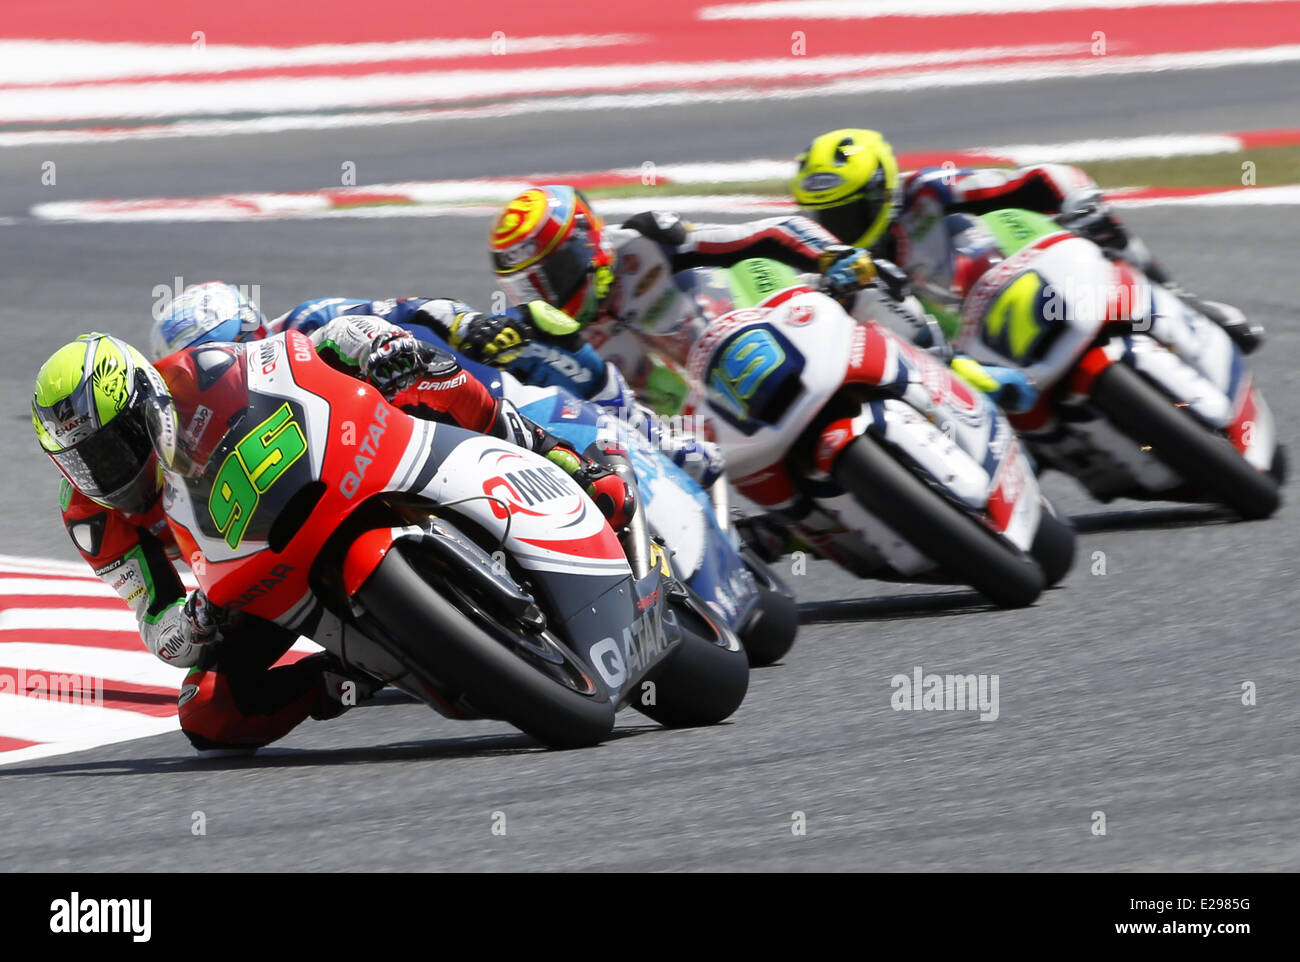 Barcelona, Spain. 15th June, 2014. BARCELONA SPAIN -15 Jun: Anthony West in Moto 2 race disputed in the circuit of Barcelona-Catalunya, on June 15, 2014. Photo: Joan Valls/Urbanandsport/Nurphoto © Joan Valls/NurPhoto/ZUMAPRESS.com/Alamy Live News Stock Photo